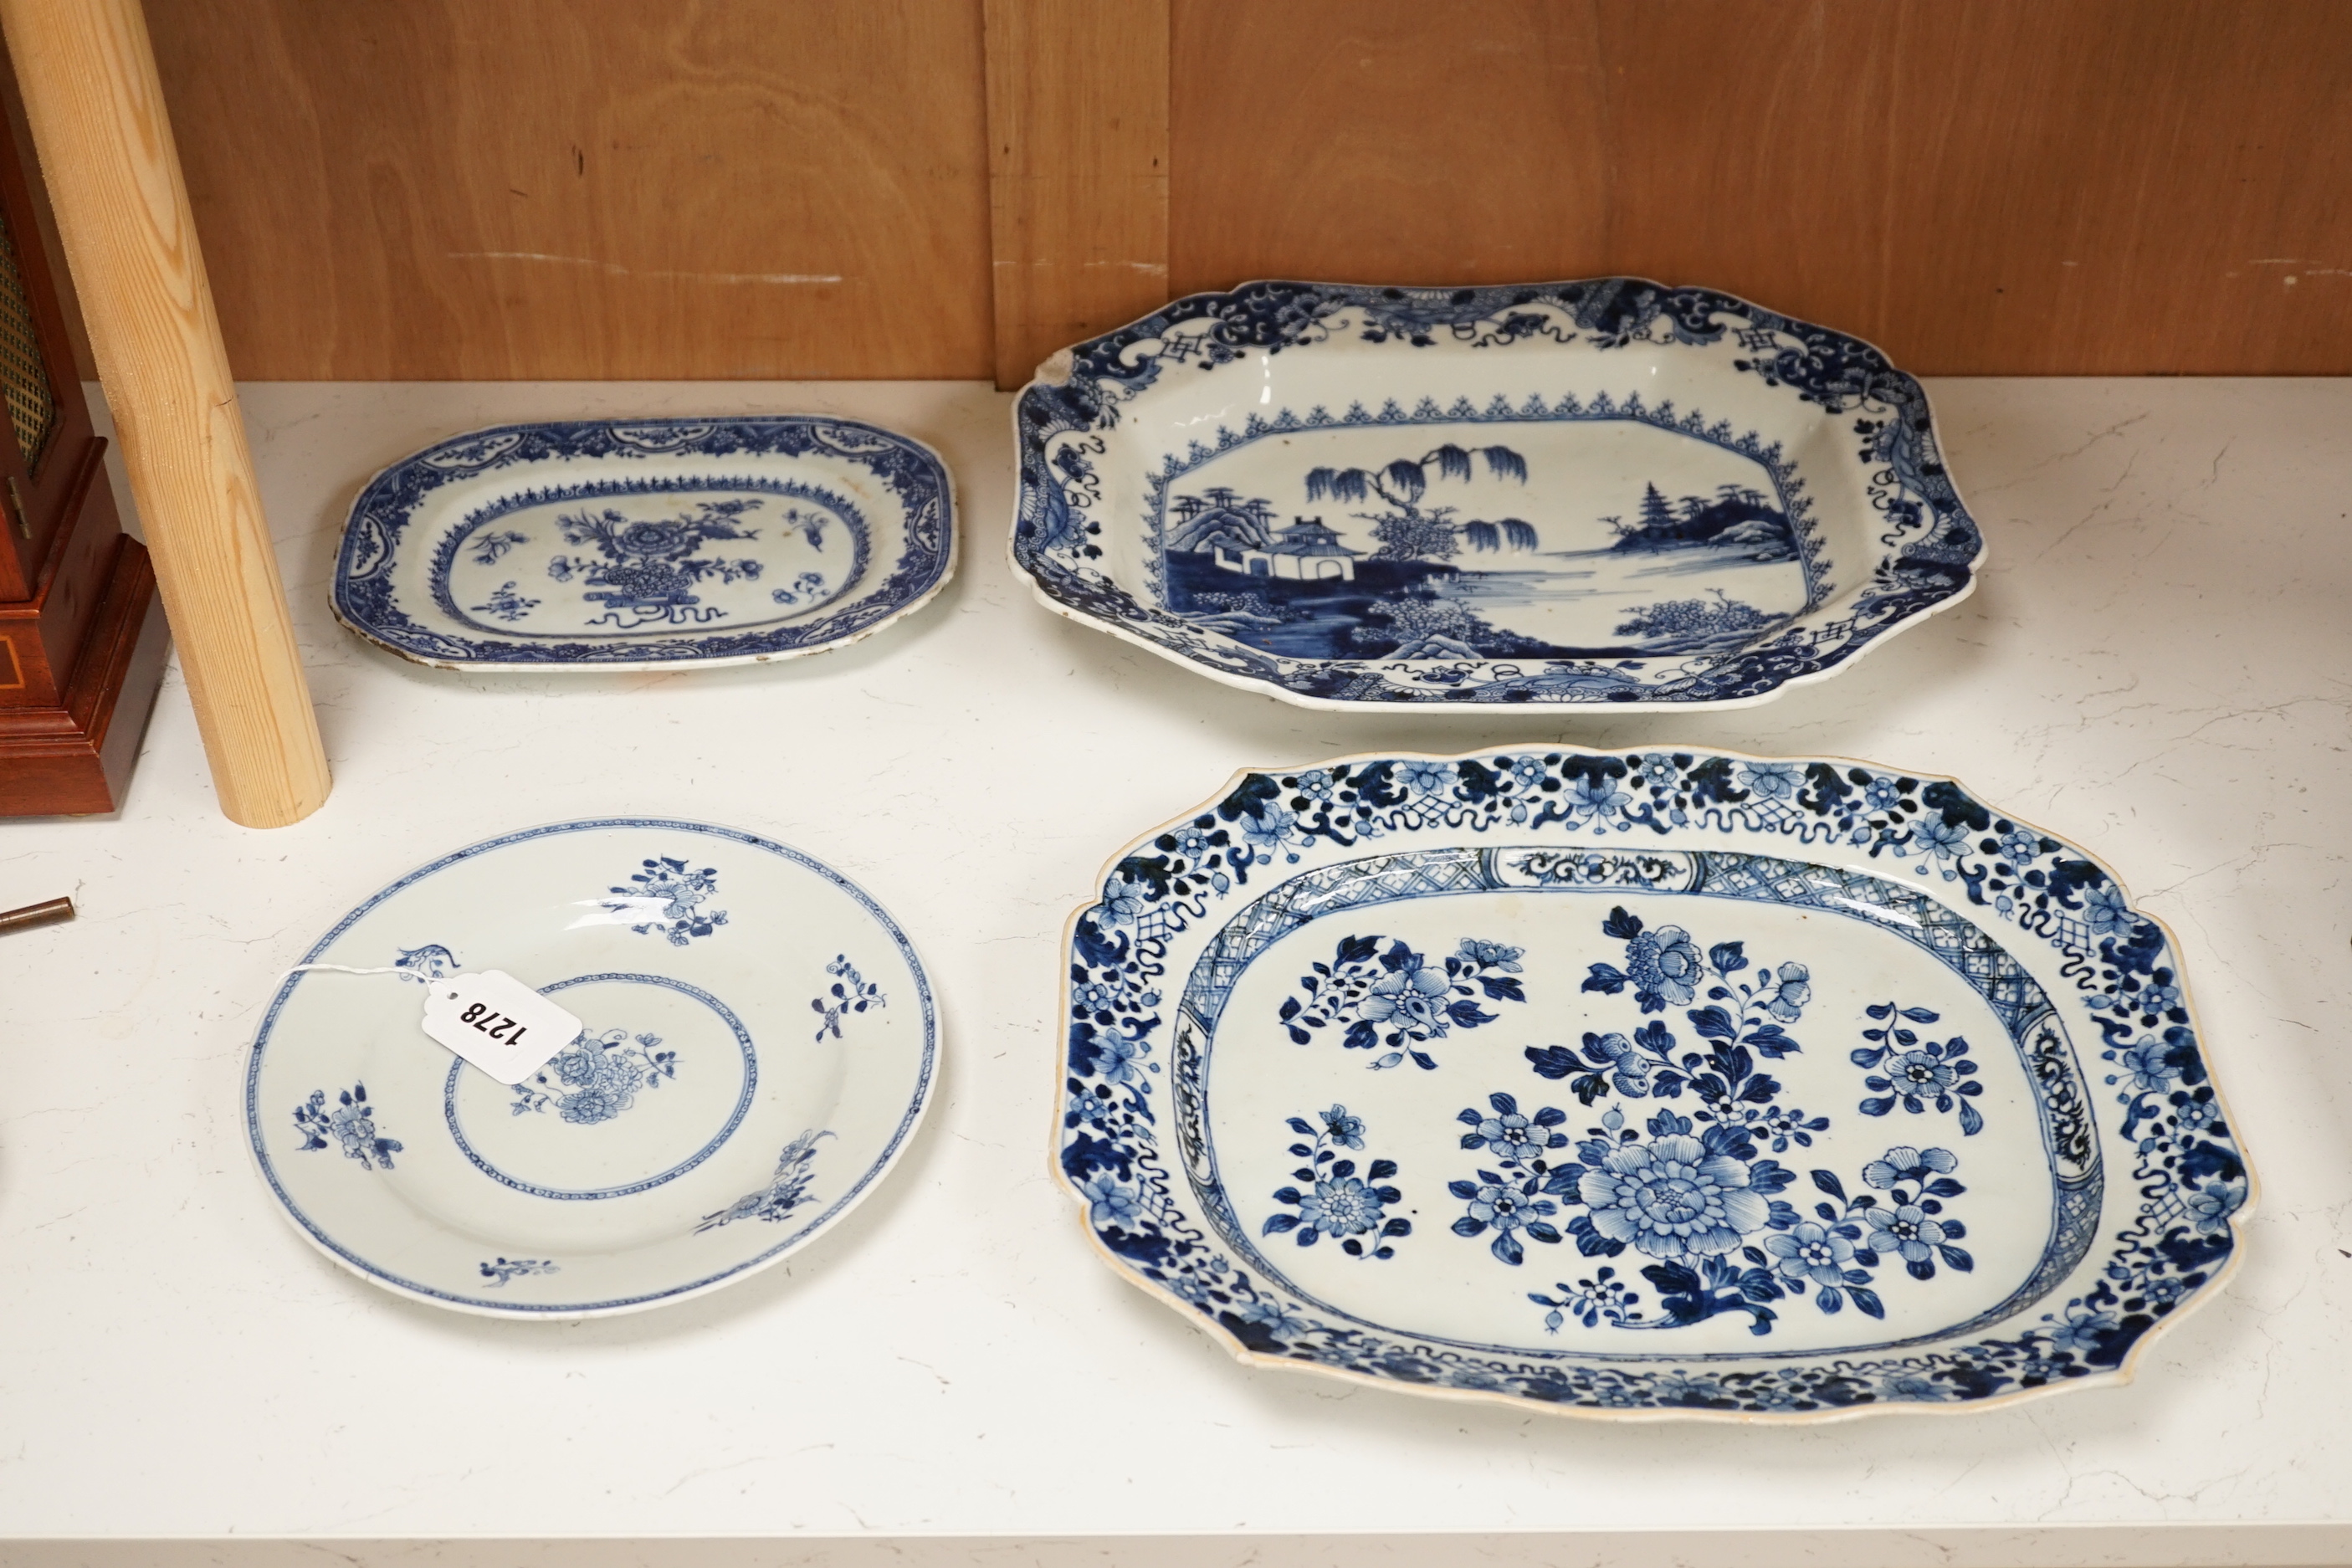 Three 18th century Chinese blue and white serving dishes and a similar plate, largest 38cm